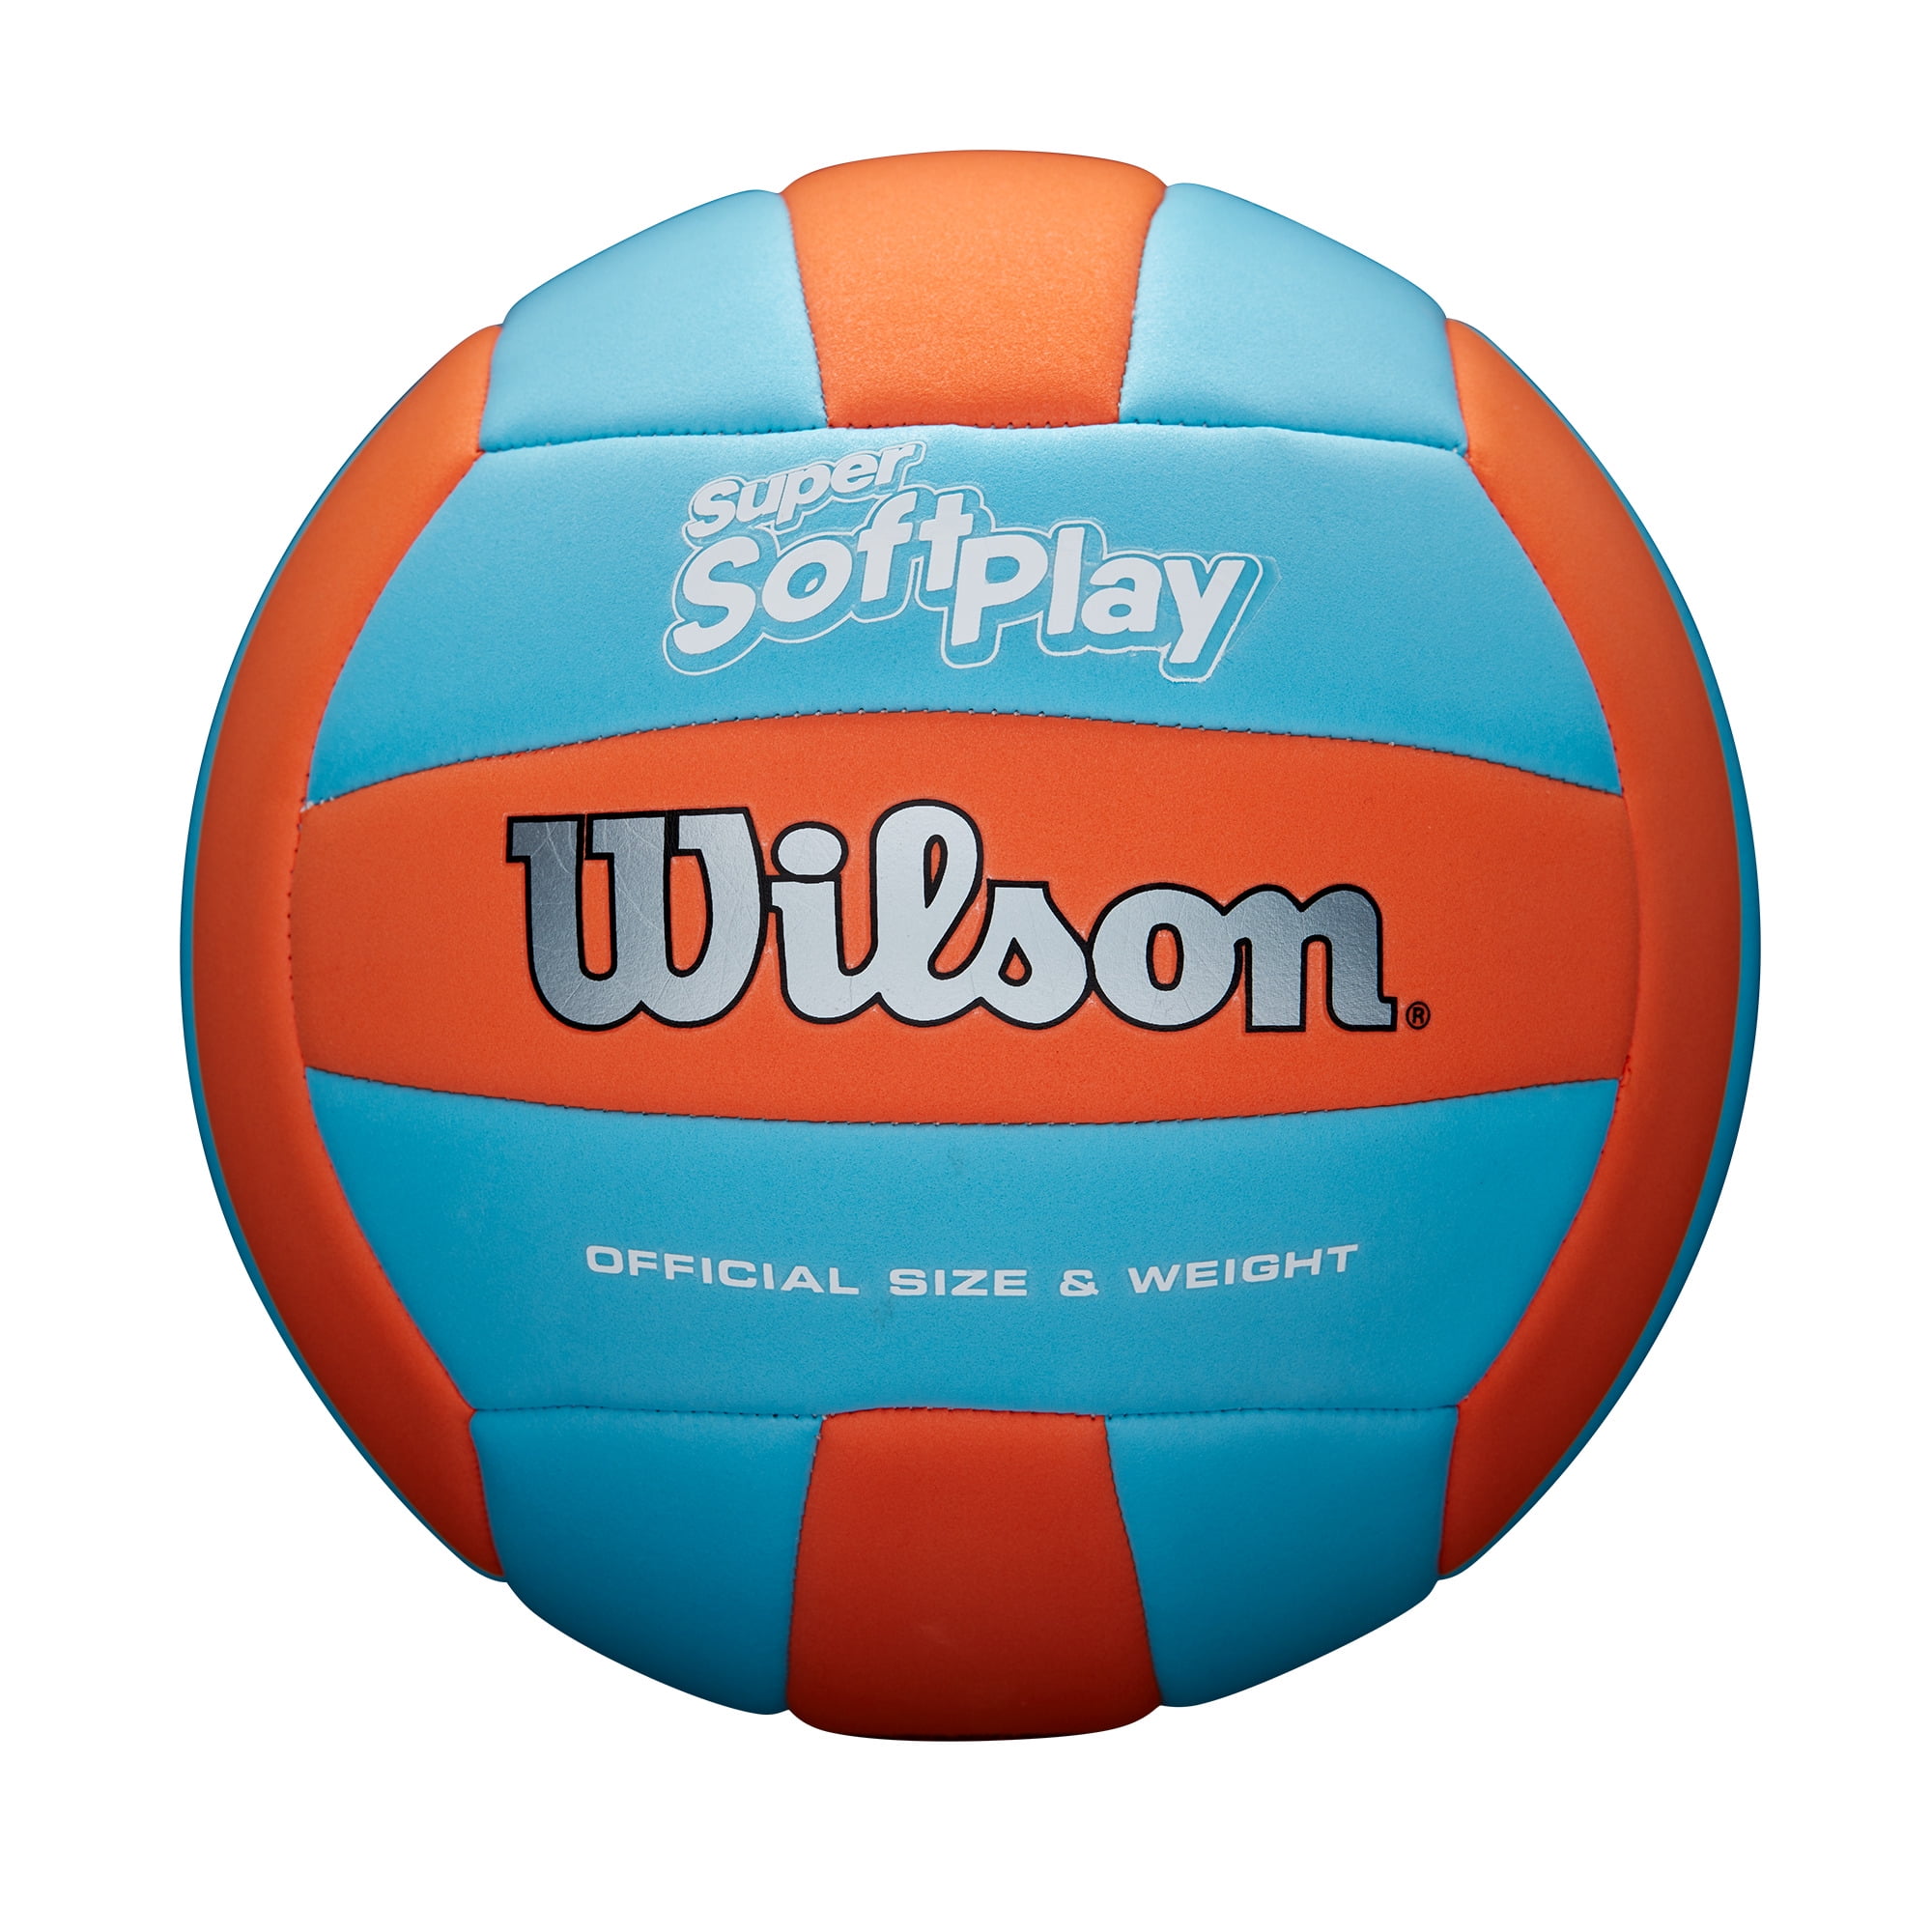 White/Red/Blue Wilson Super Soft Play VB WHRDBLUE Volleyball Official Unisex-Adult 